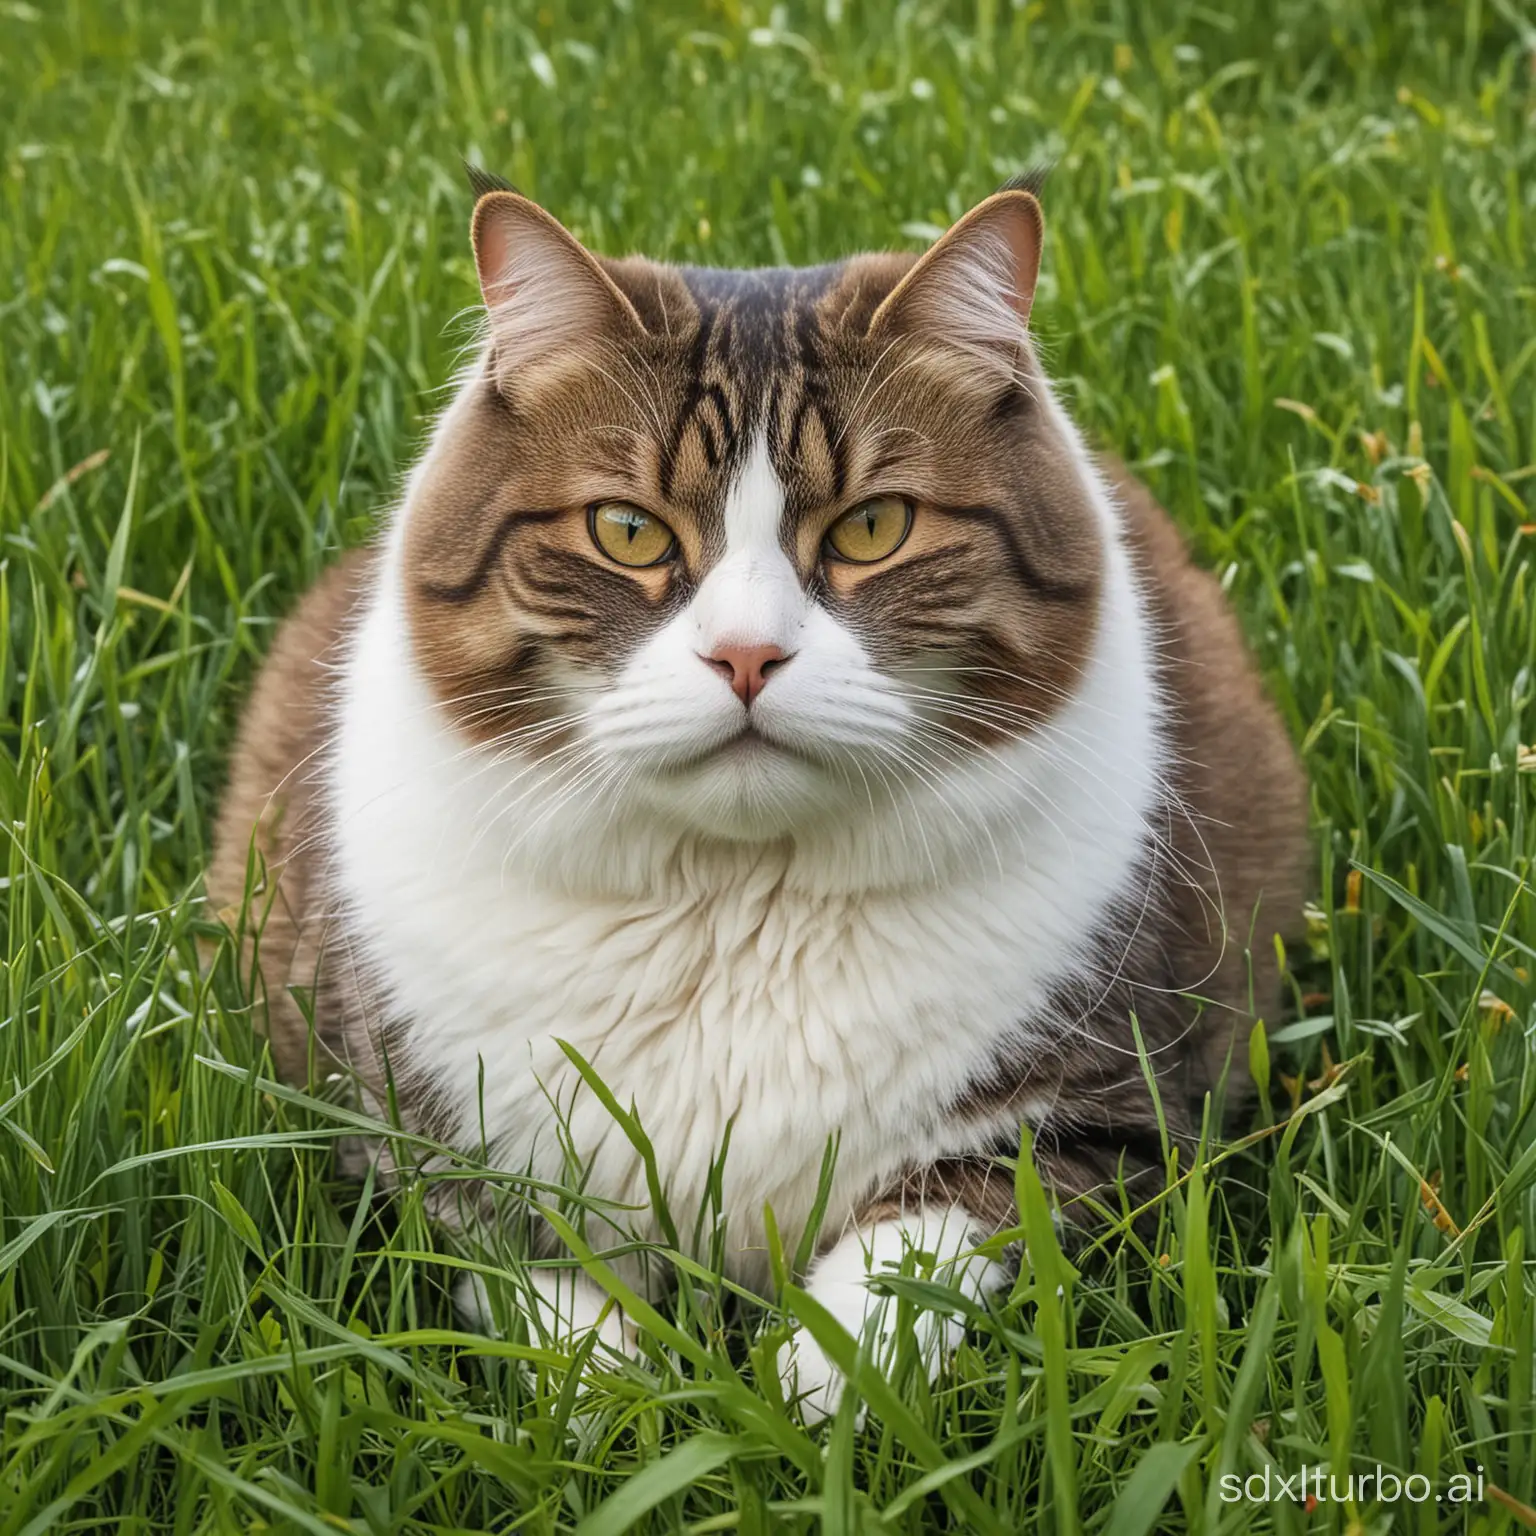 Plump-Tabby-Cat-Resting-in-Lush-Green-Meadow